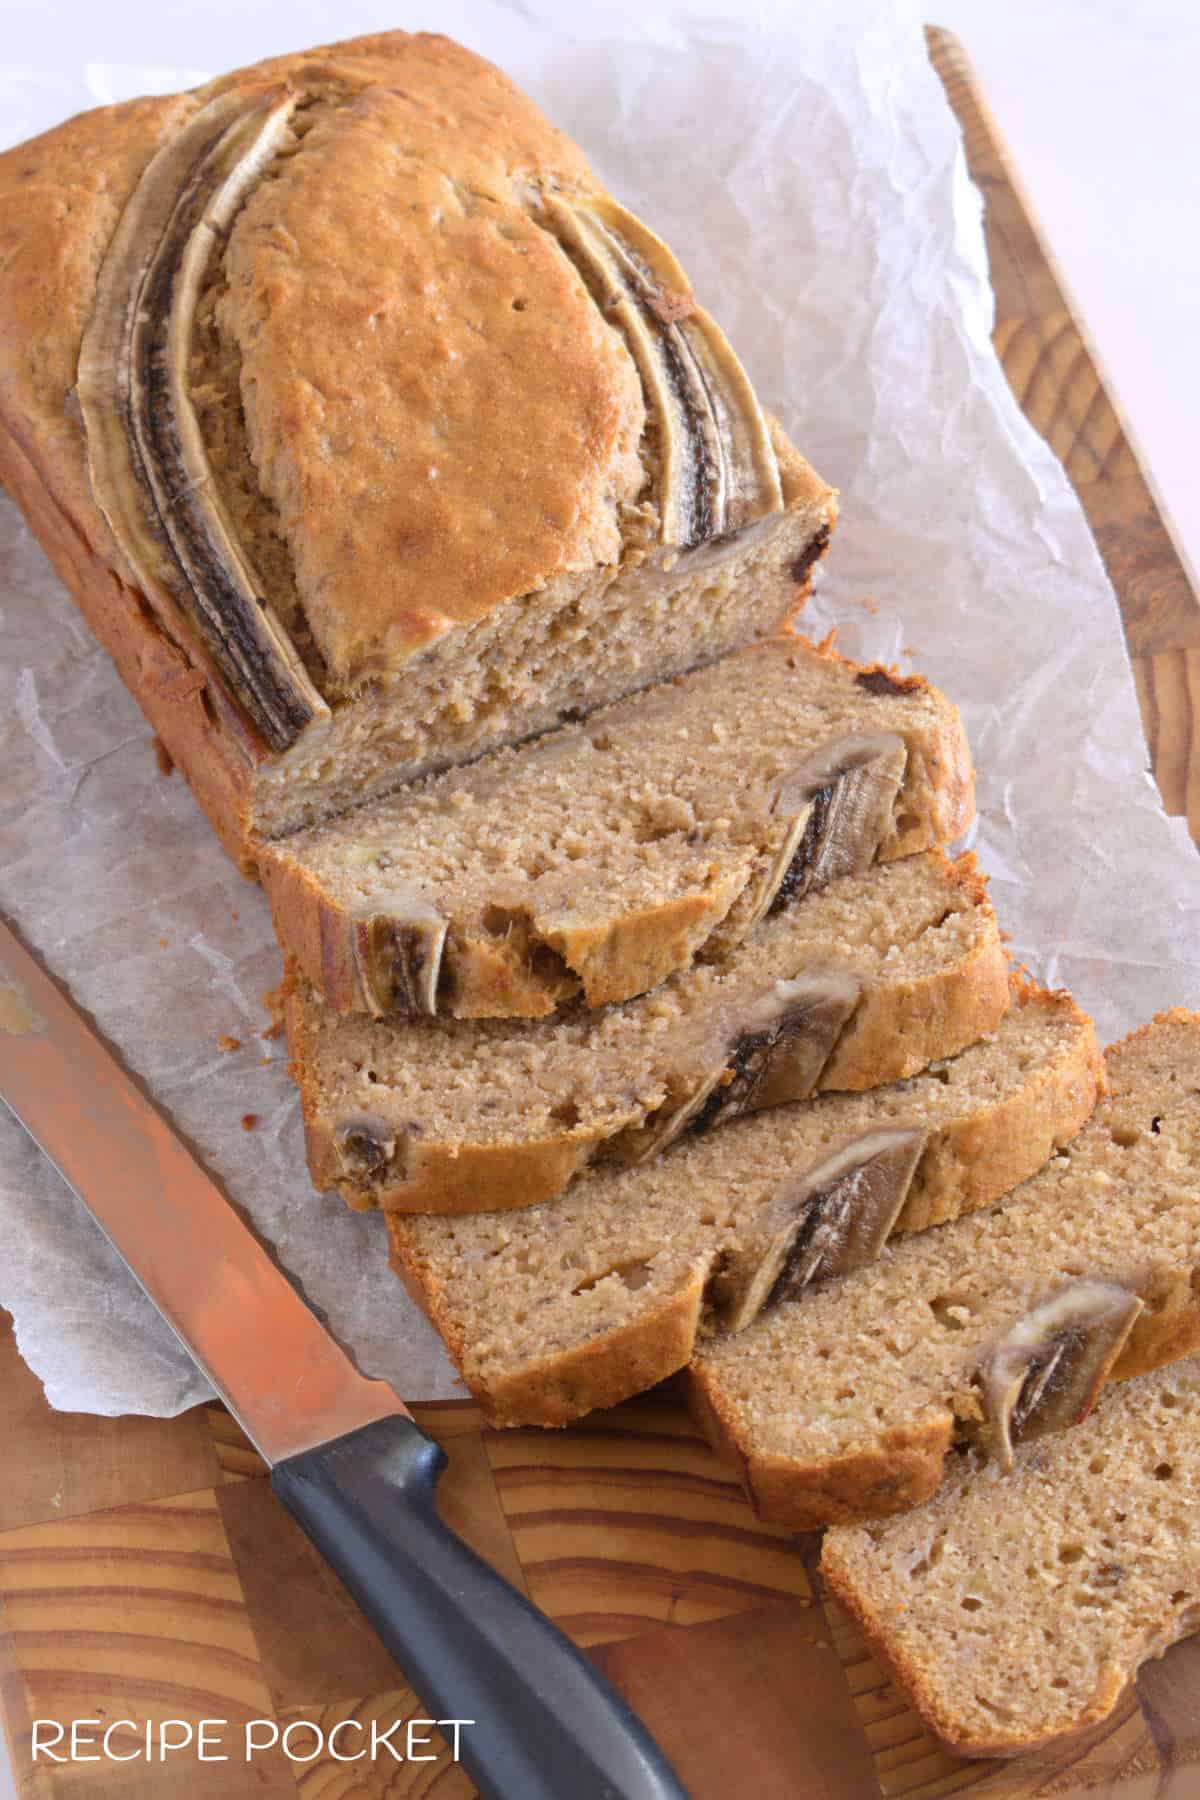 A top view image showing banana bread cut into slices.